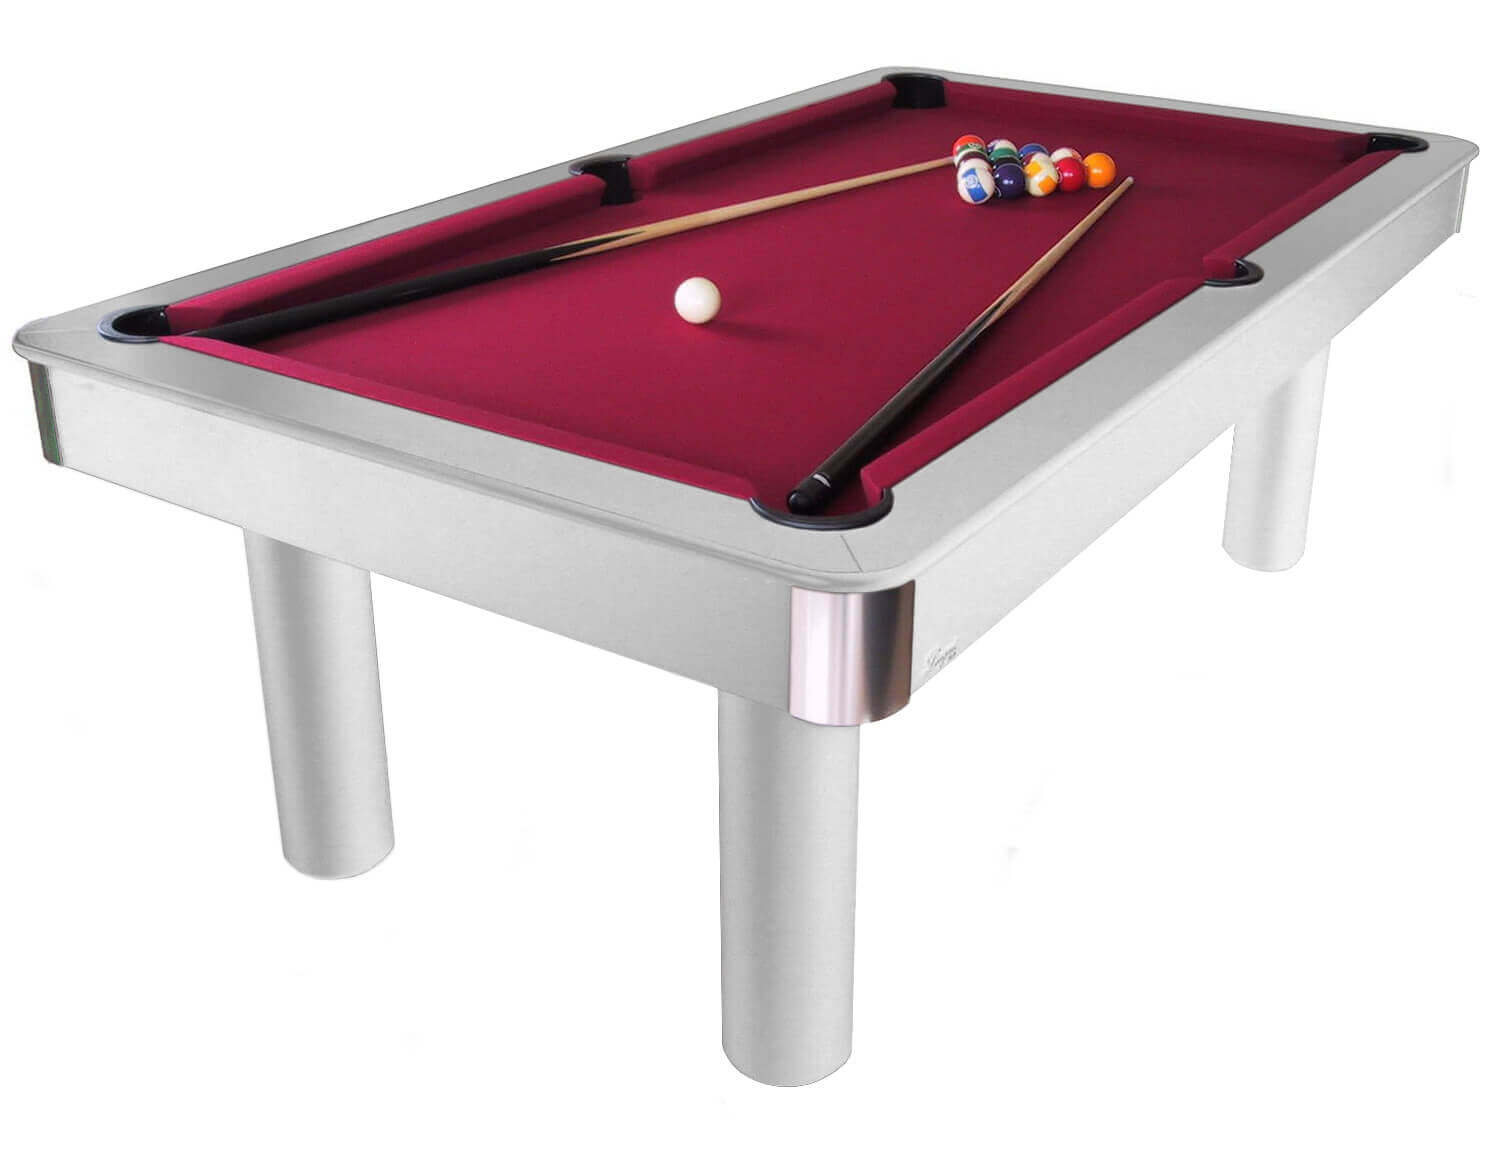 Billiard Table Made In The UK 6ft Pool Table Cover Red Heavy Duty Material 